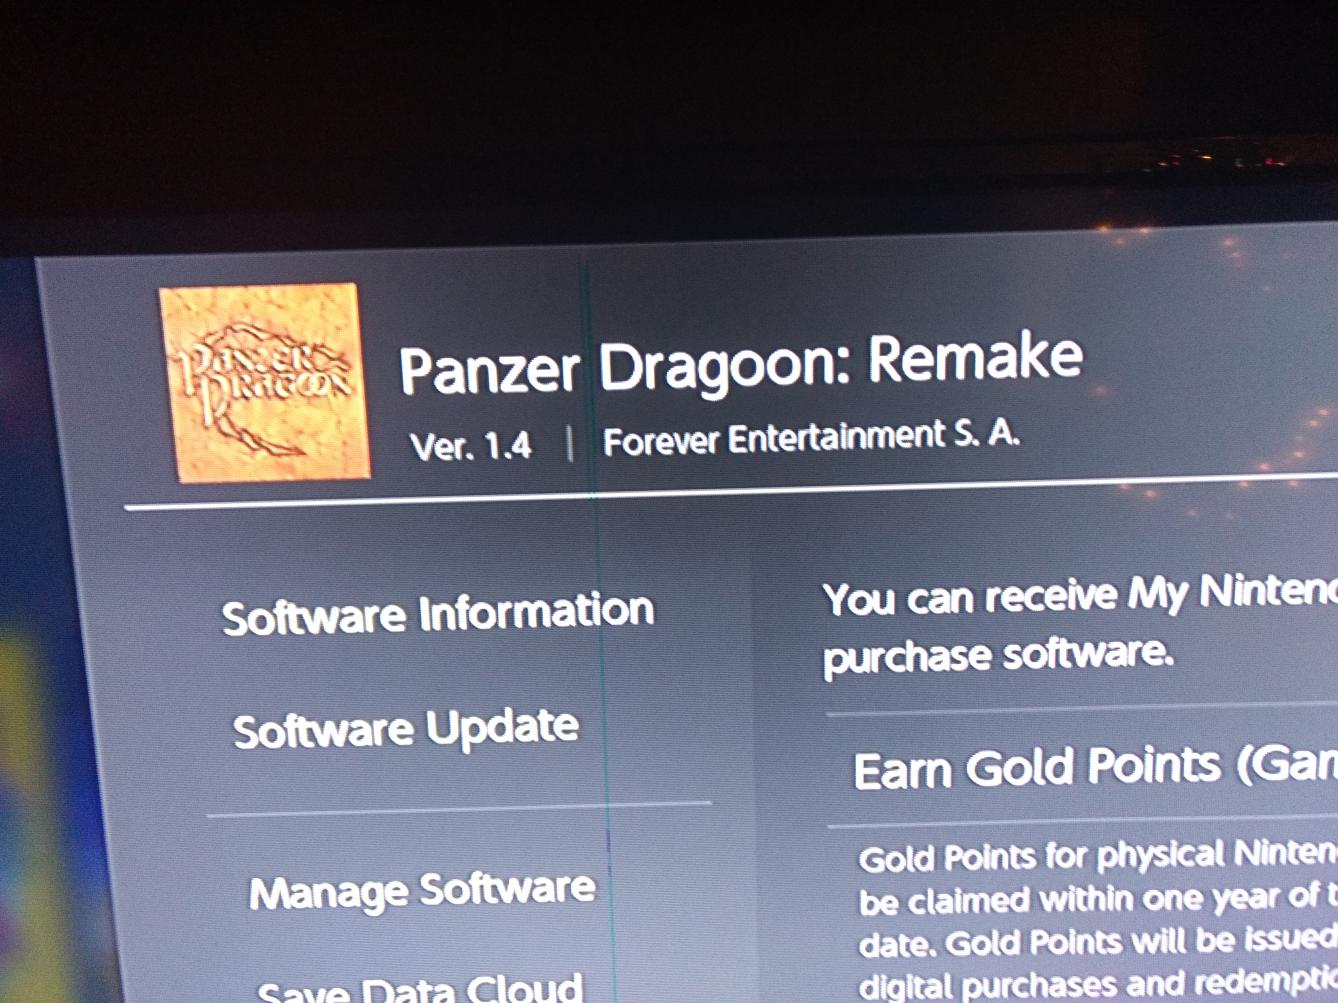 Panzer Dragoon: Remake v1.4 is the Physical Version of v1.3